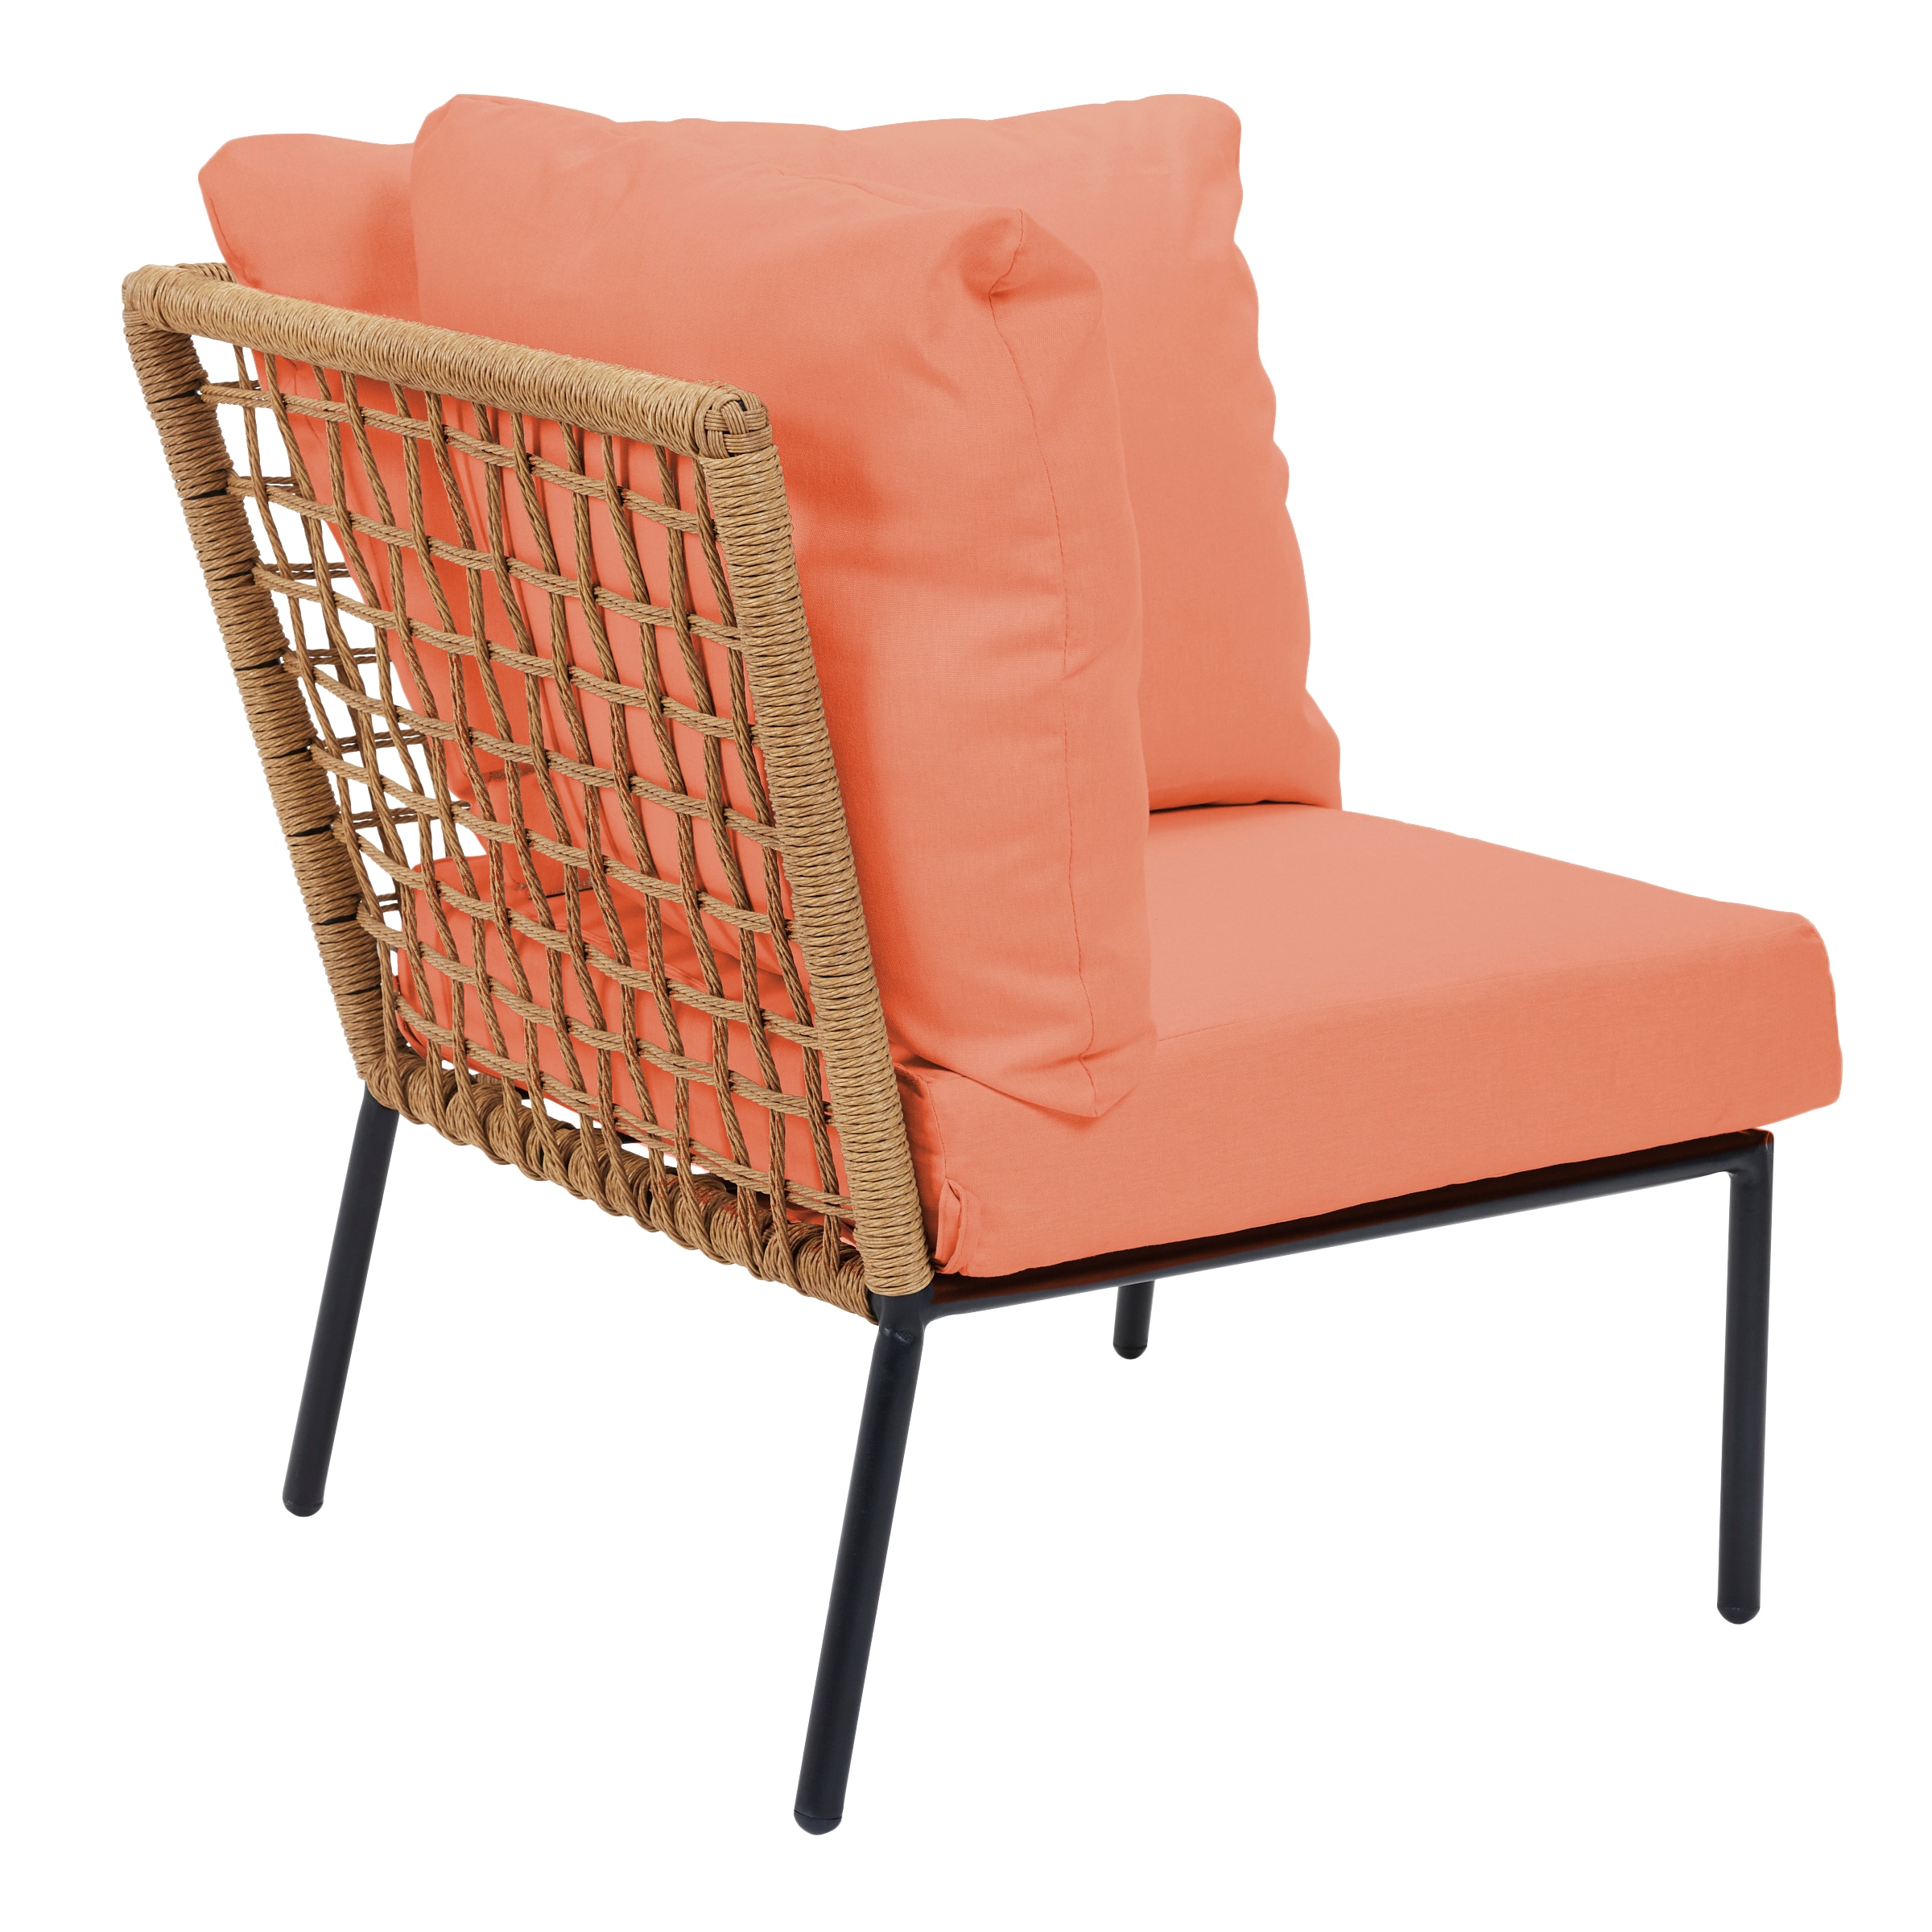 Origin 21 Clairmont Conversation with Sets Patio Set Wicker Conversation at Patio Cushions department in Orange 4-Piece the